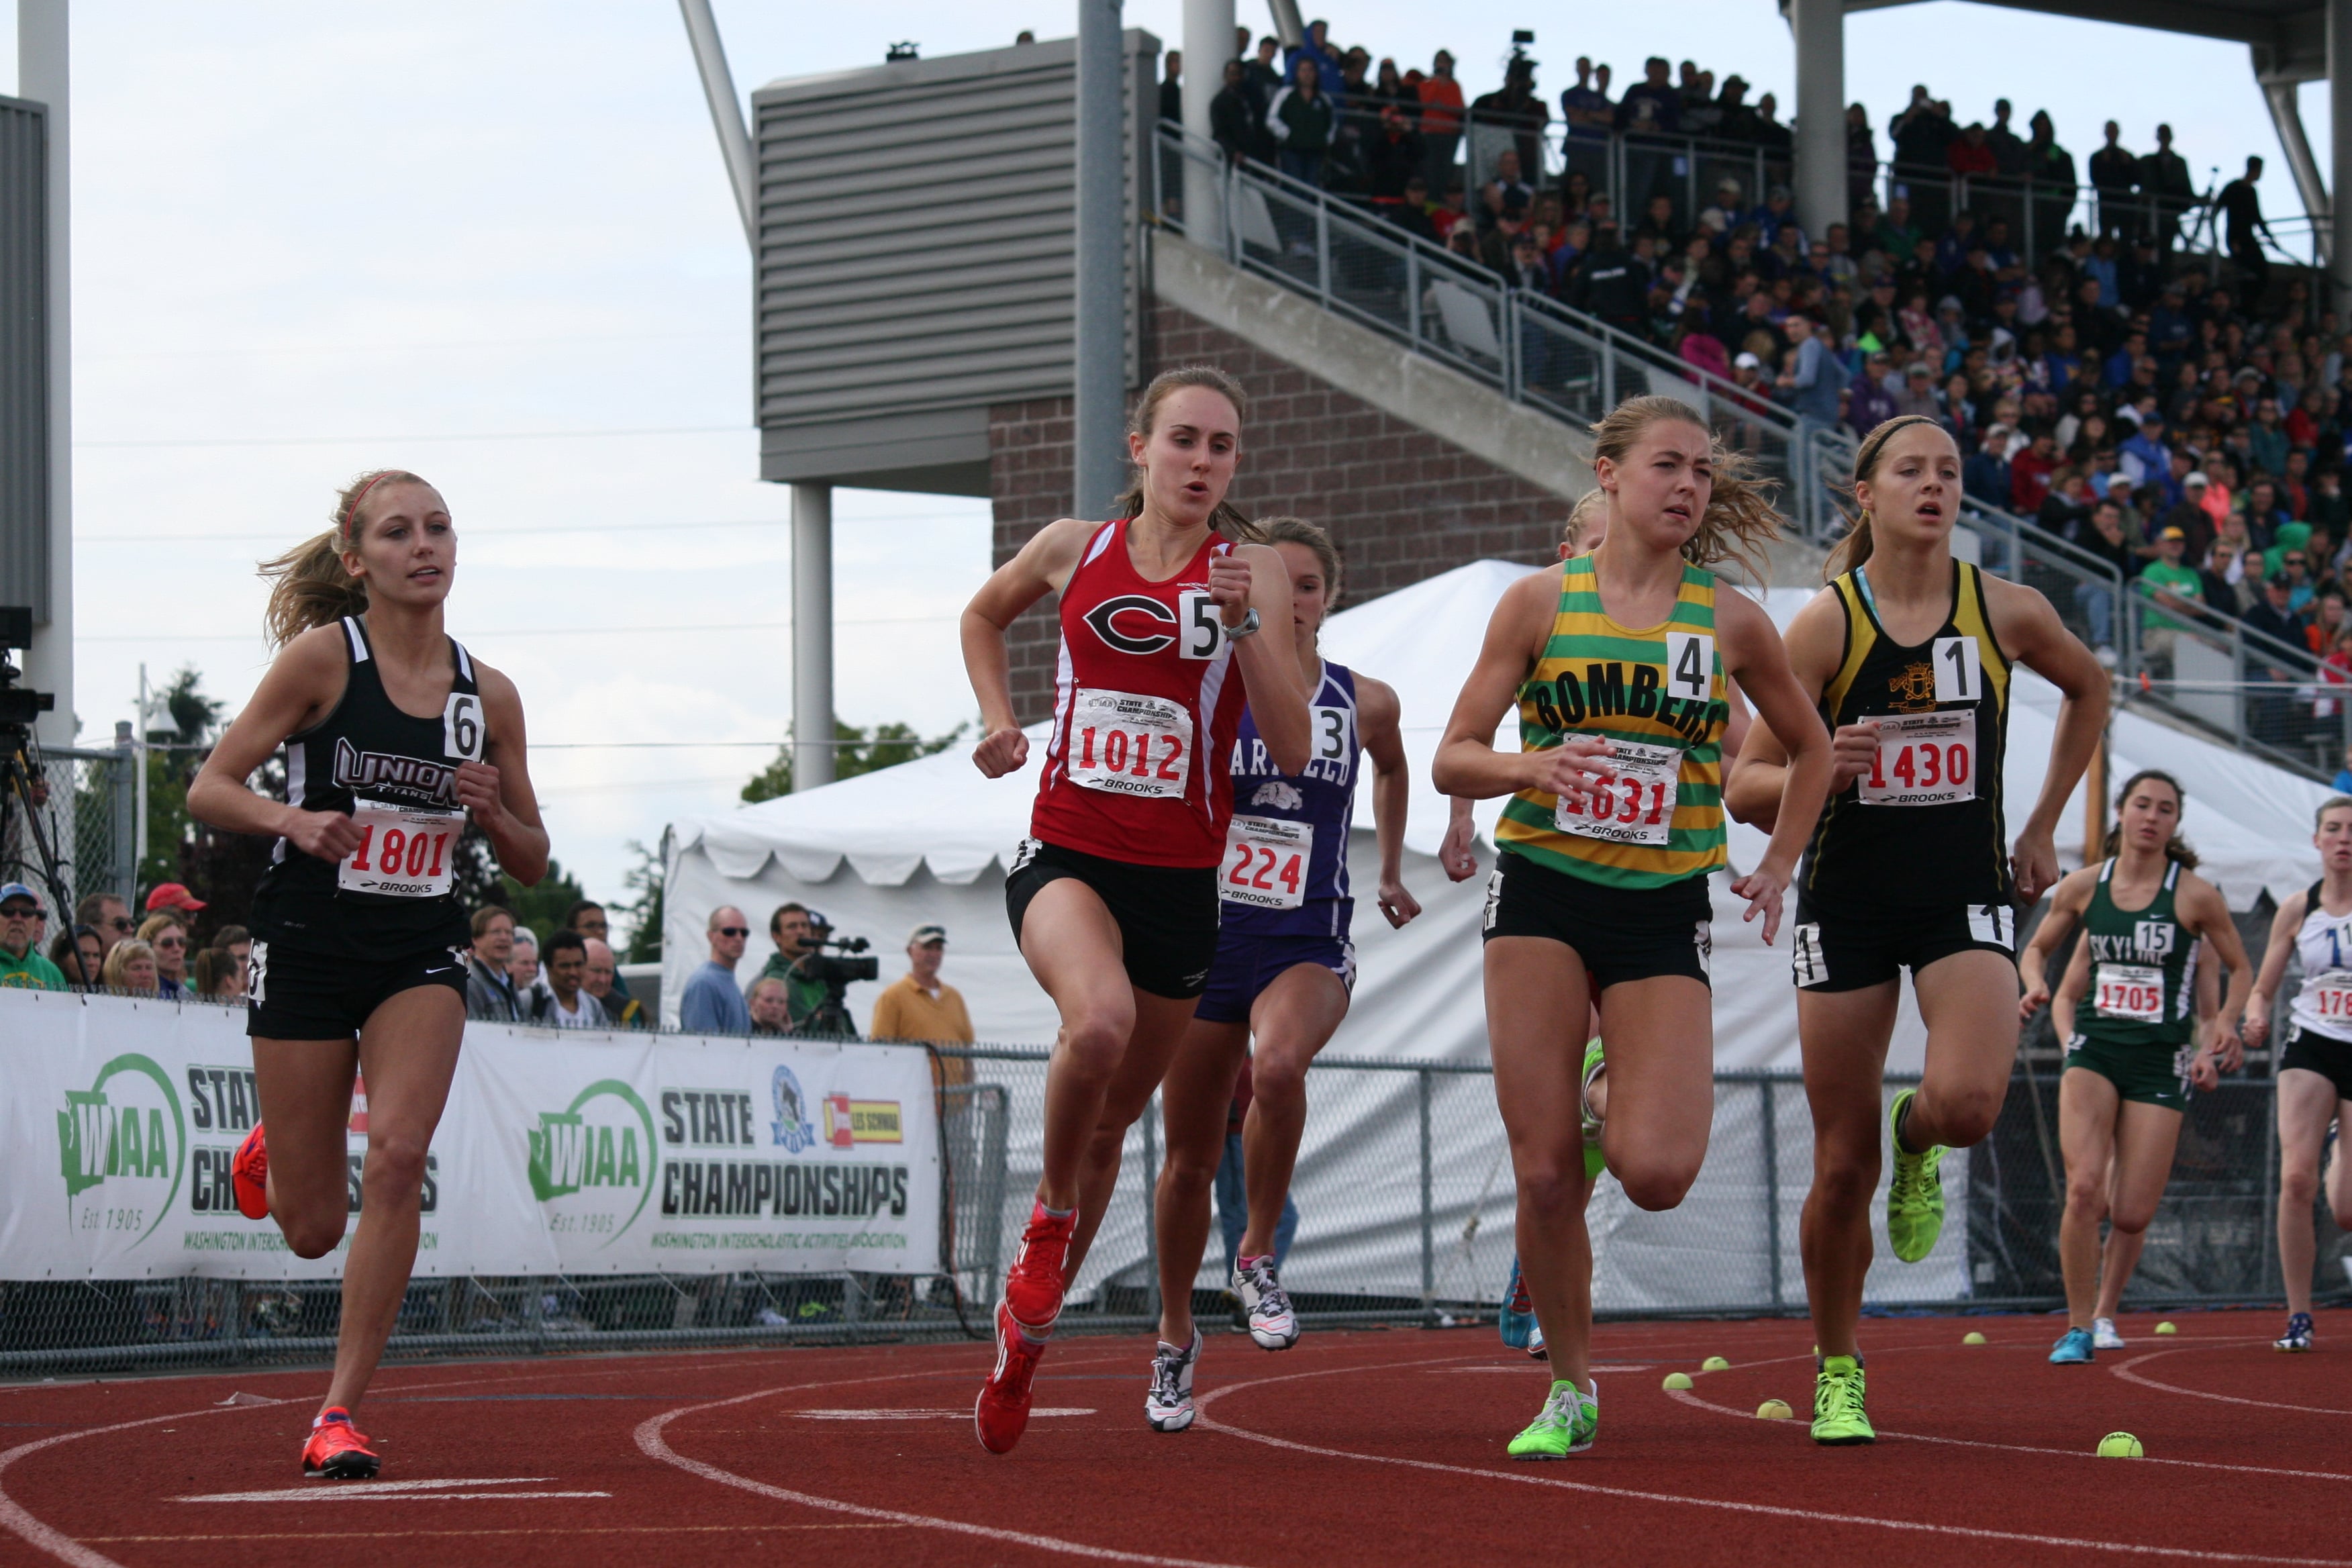 Excellent start by Alexa Efraimson in the 1,600 state championship race.